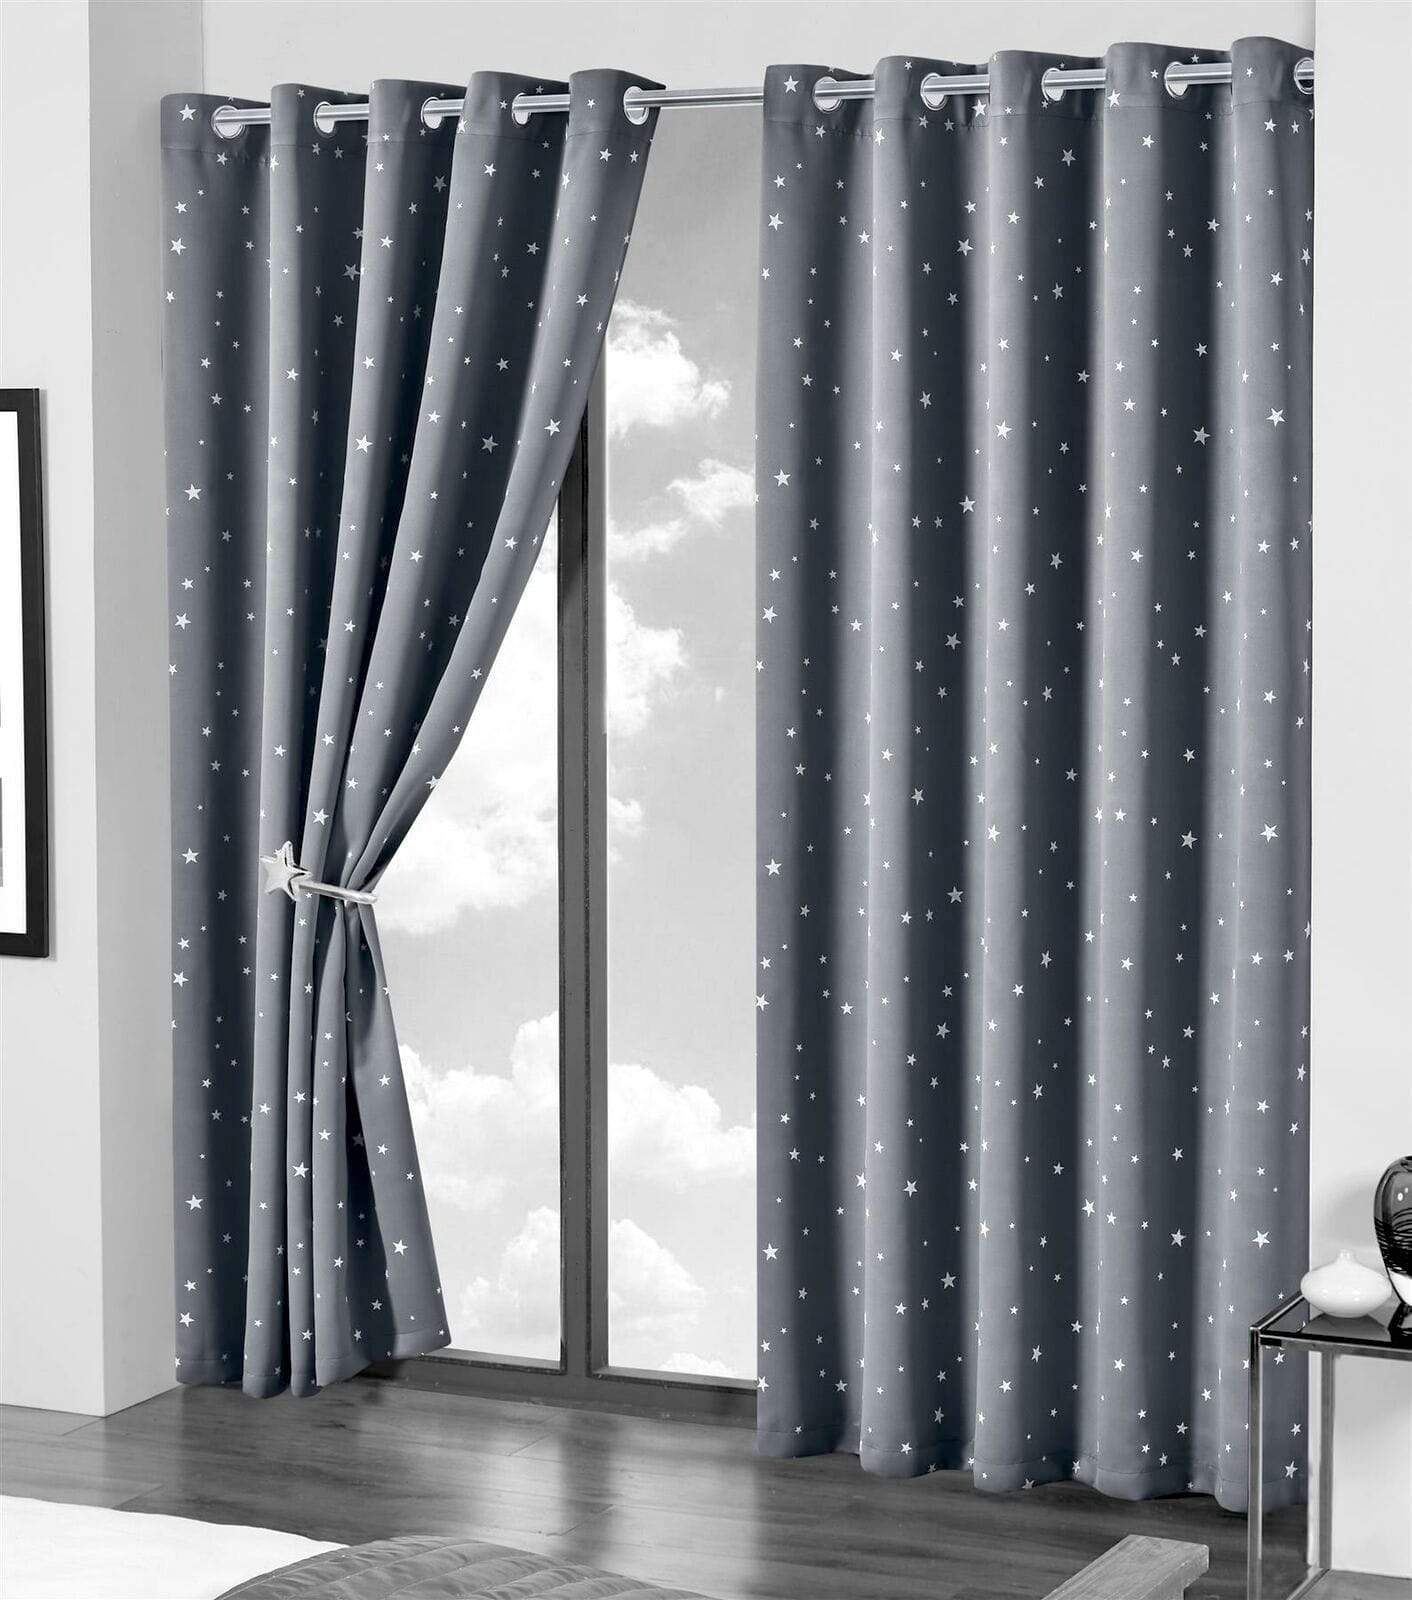 Glow In The Dark Blackout Curtains 46" x 54" / GREY STARS OLIVIA ROCCO Curtain